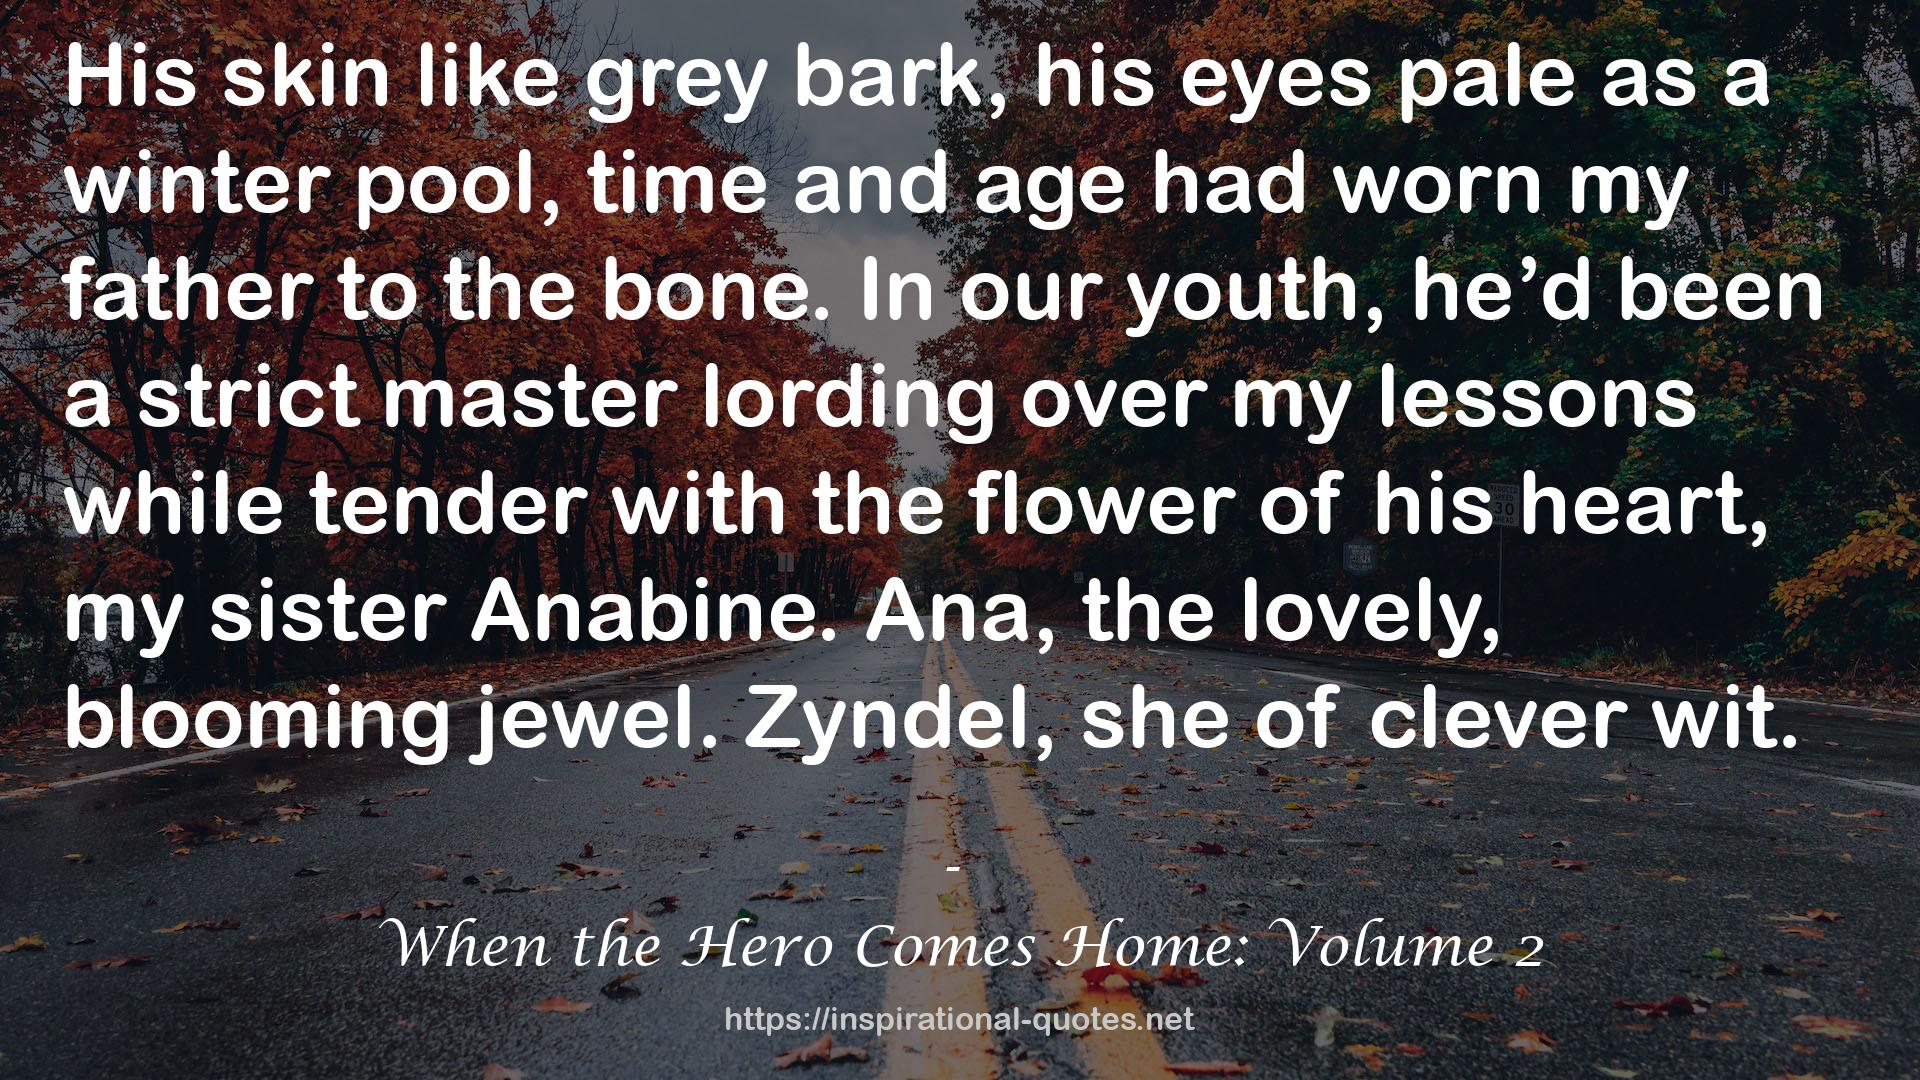 When the Hero Comes Home: Volume 2 QUOTES